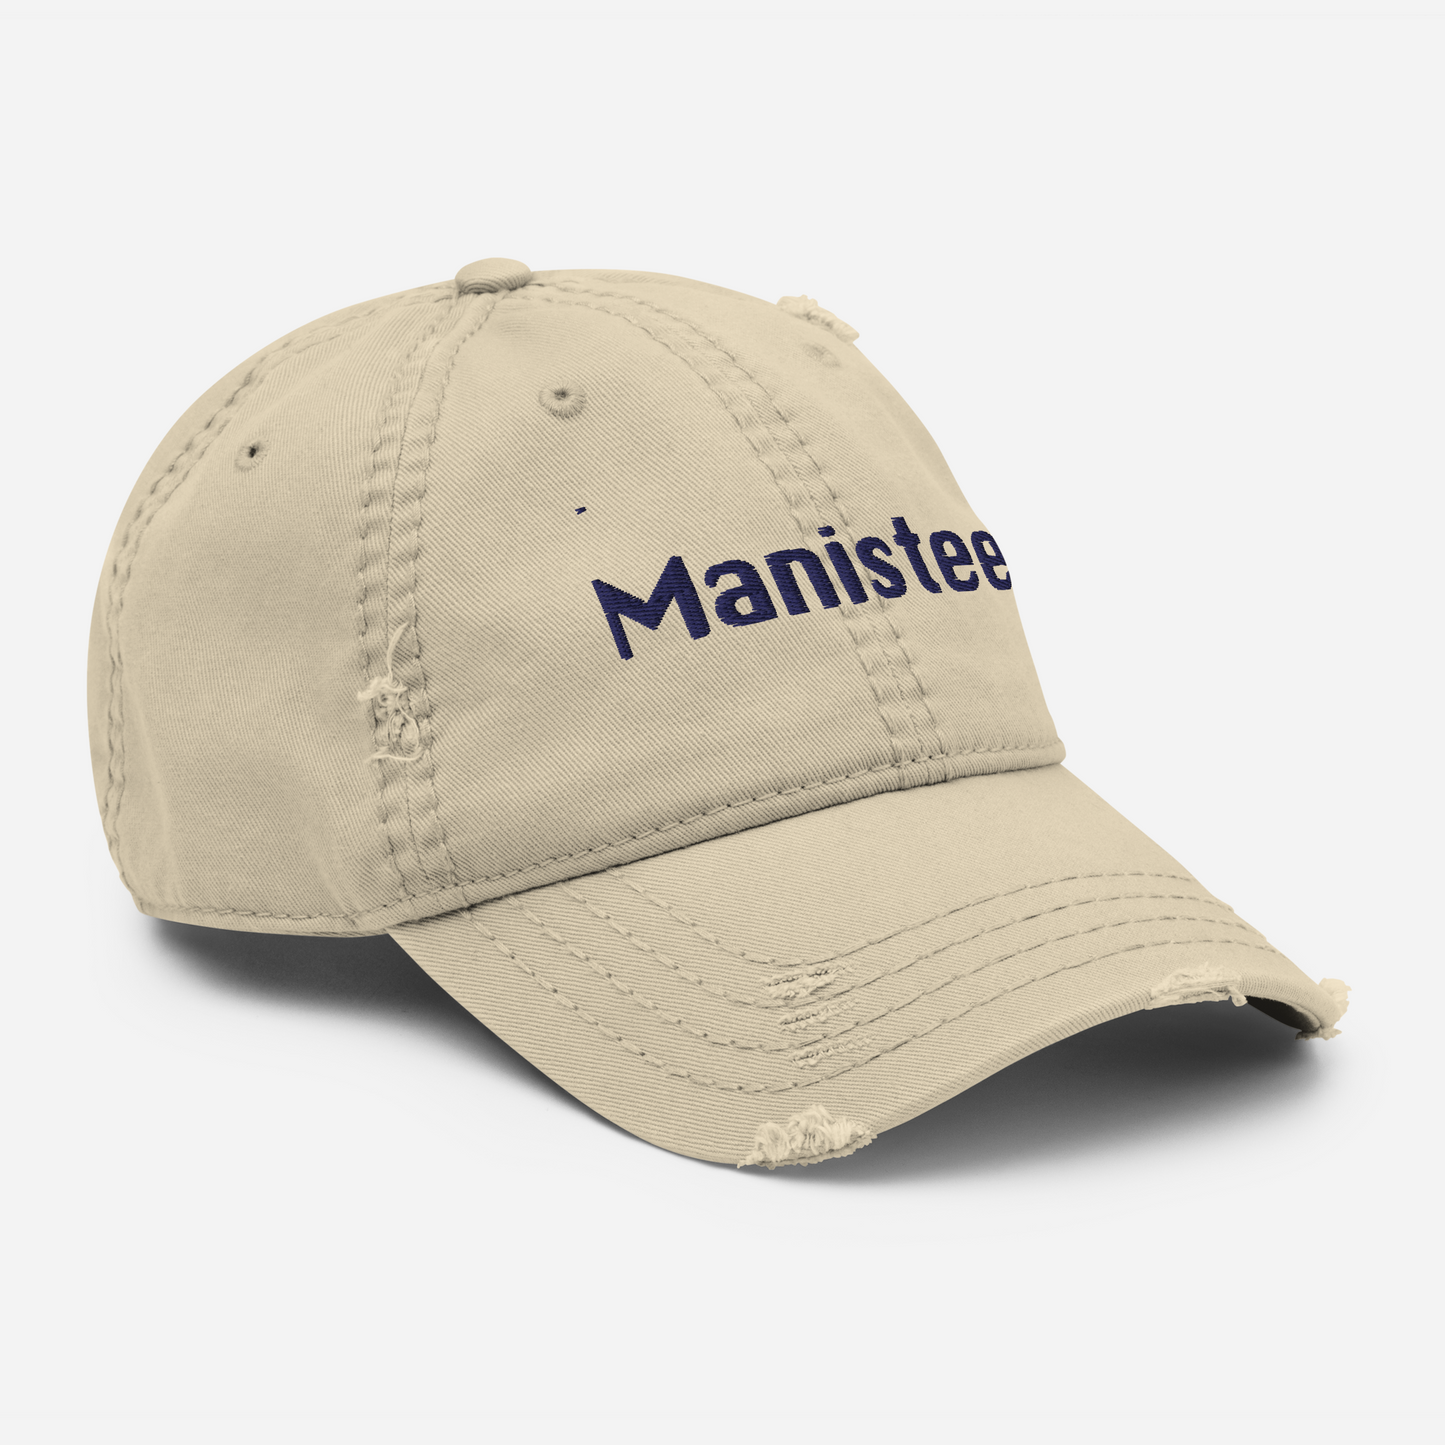 'Manistee' Distressed Dad Hat | White/Black Embroidery